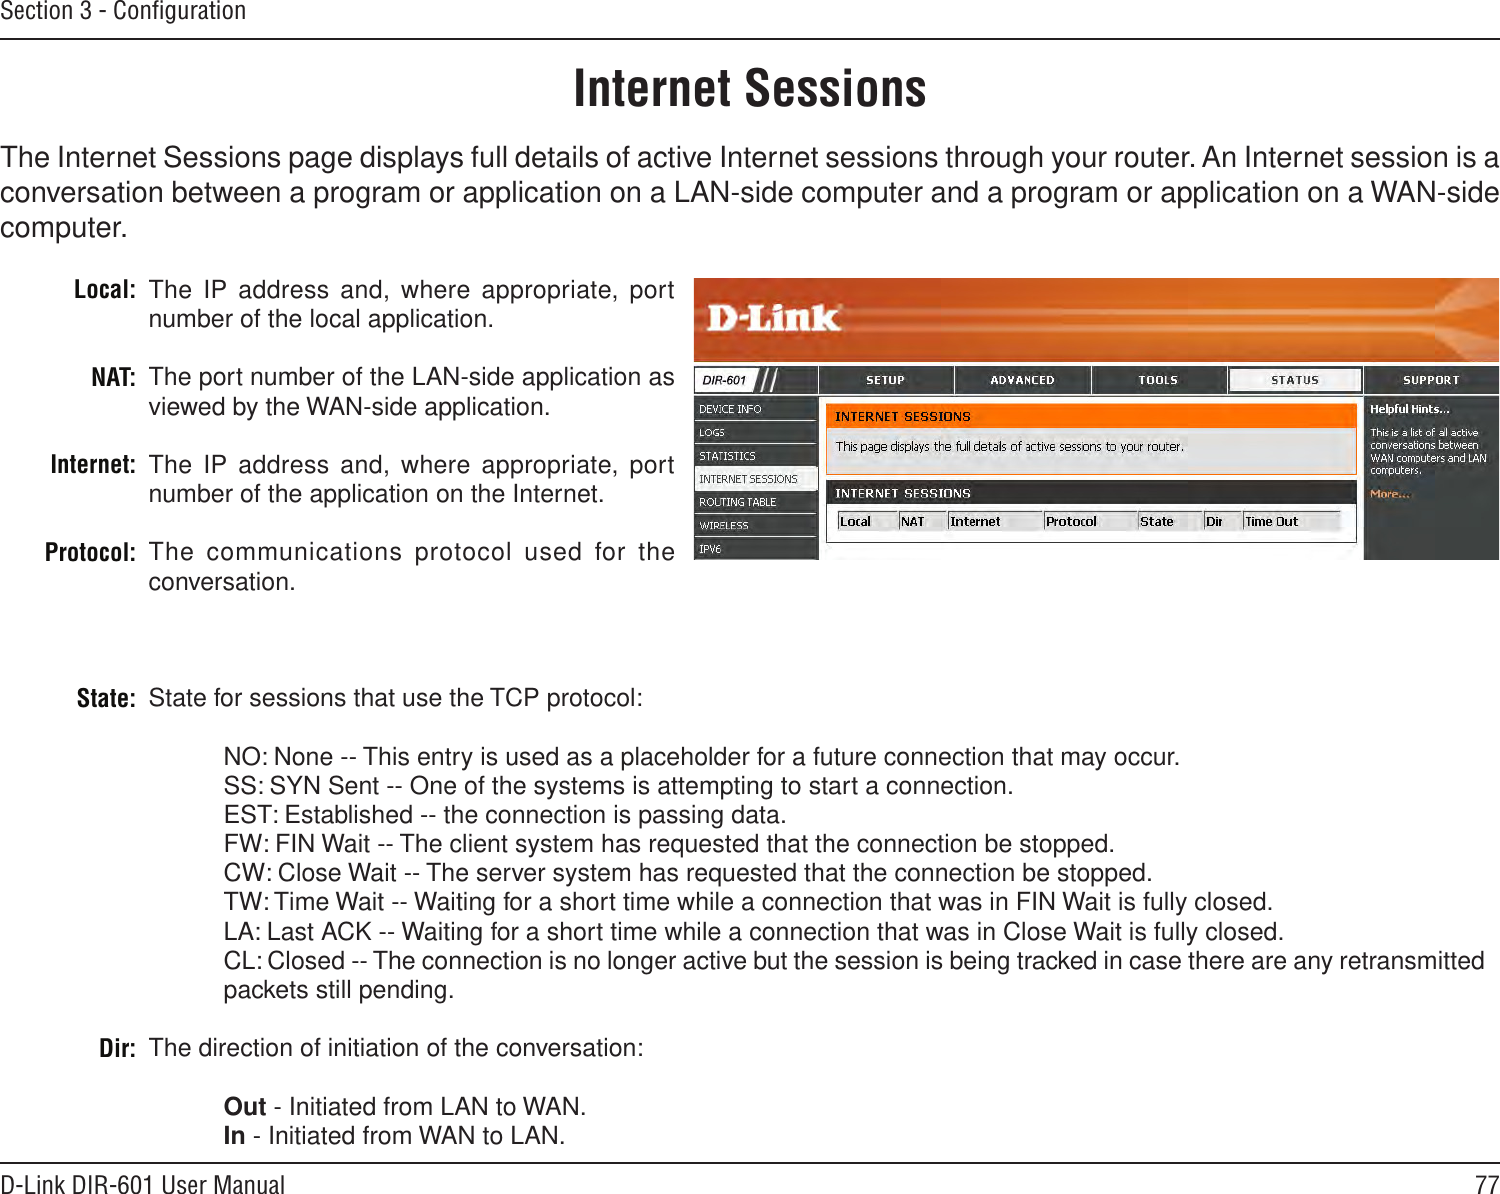 77D-Link DIR-601 User ManualSection 3 - ConﬁgurationInternet SessionsThe Internet Sessions page displays full details of active Internet sessions through your router. An Internet session is a conversation between a program or application on a LAN-side computer and a program or application on a WAN-side computer. Local:NAT:Internet:Protocol:State:Dir:The IP address and, where  appropriate, port number of the local application. The port number of the LAN-side application as viewed by the WAN-side application. The IP address and, where  appropriate, port number of the application on the Internet. The communications protocol used for the conversation. State for sessions that use the TCP protocol:  NO: None -- This entry is used as a placeholder for a future connection that may occur.  SS: SYN Sent -- One of the systems is attempting to start a connection.  EST: Established -- the connection is passing data.  FW: FIN Wait -- The client system has requested that the connection be stopped.  CW: Close Wait -- The server system has requested that the connection be stopped.  TW: Time Wait -- Waiting for a short time while a connection that was in FIN Wait is fully closed.  LA: Last ACK -- Waiting for a short time while a connection that was in Close Wait is fully closed. CL: Closed -- The connection is no longer active but the session is being tracked in case there are any retransmitted packets still pending.The direction of initiation of the conversation:   Out - Initiated from LAN to WAN.  In - Initiated from WAN to LAN.